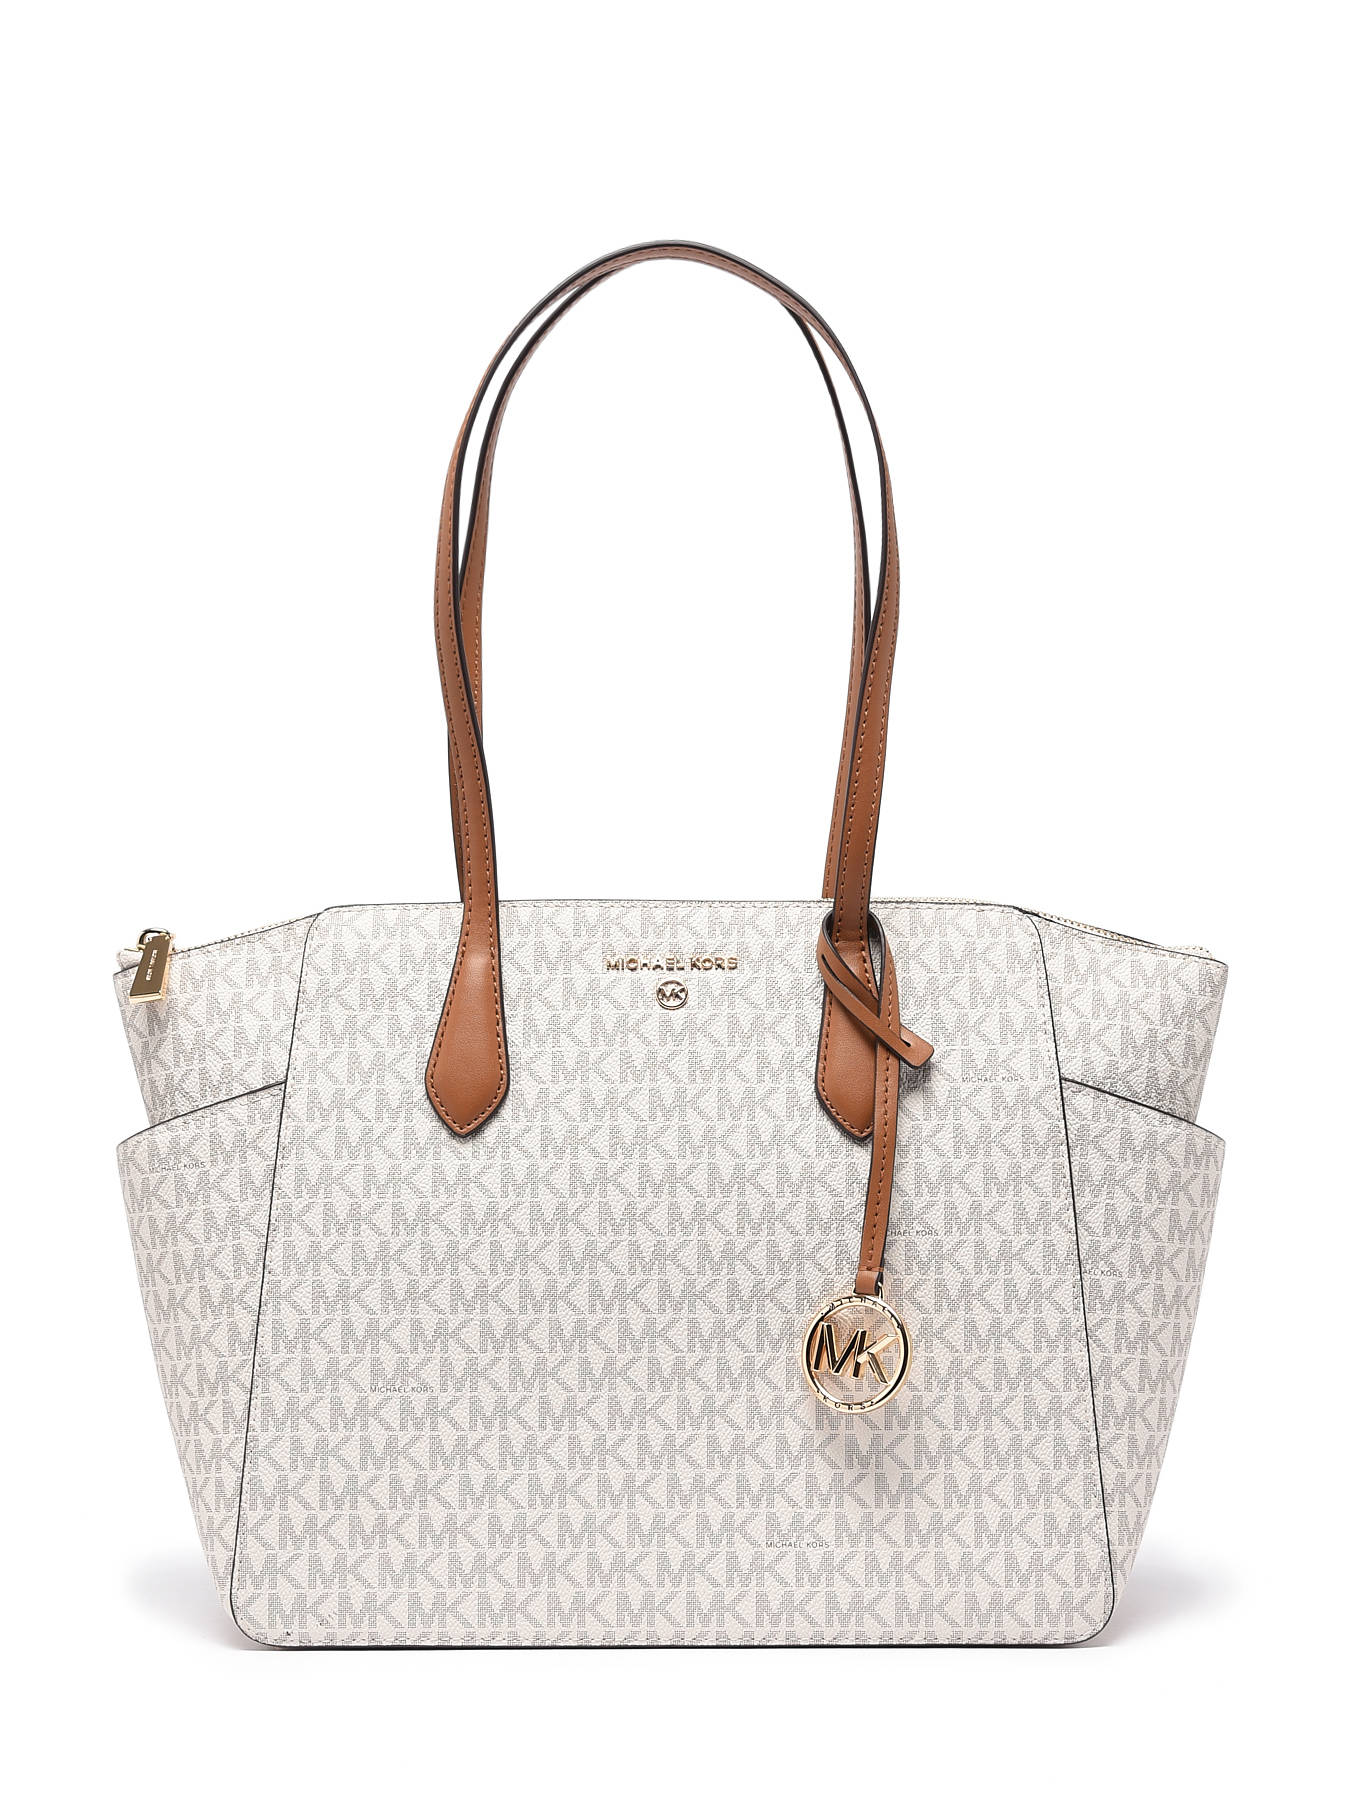 Bedford leather travel bag Michael Kors White in Leather  31482299